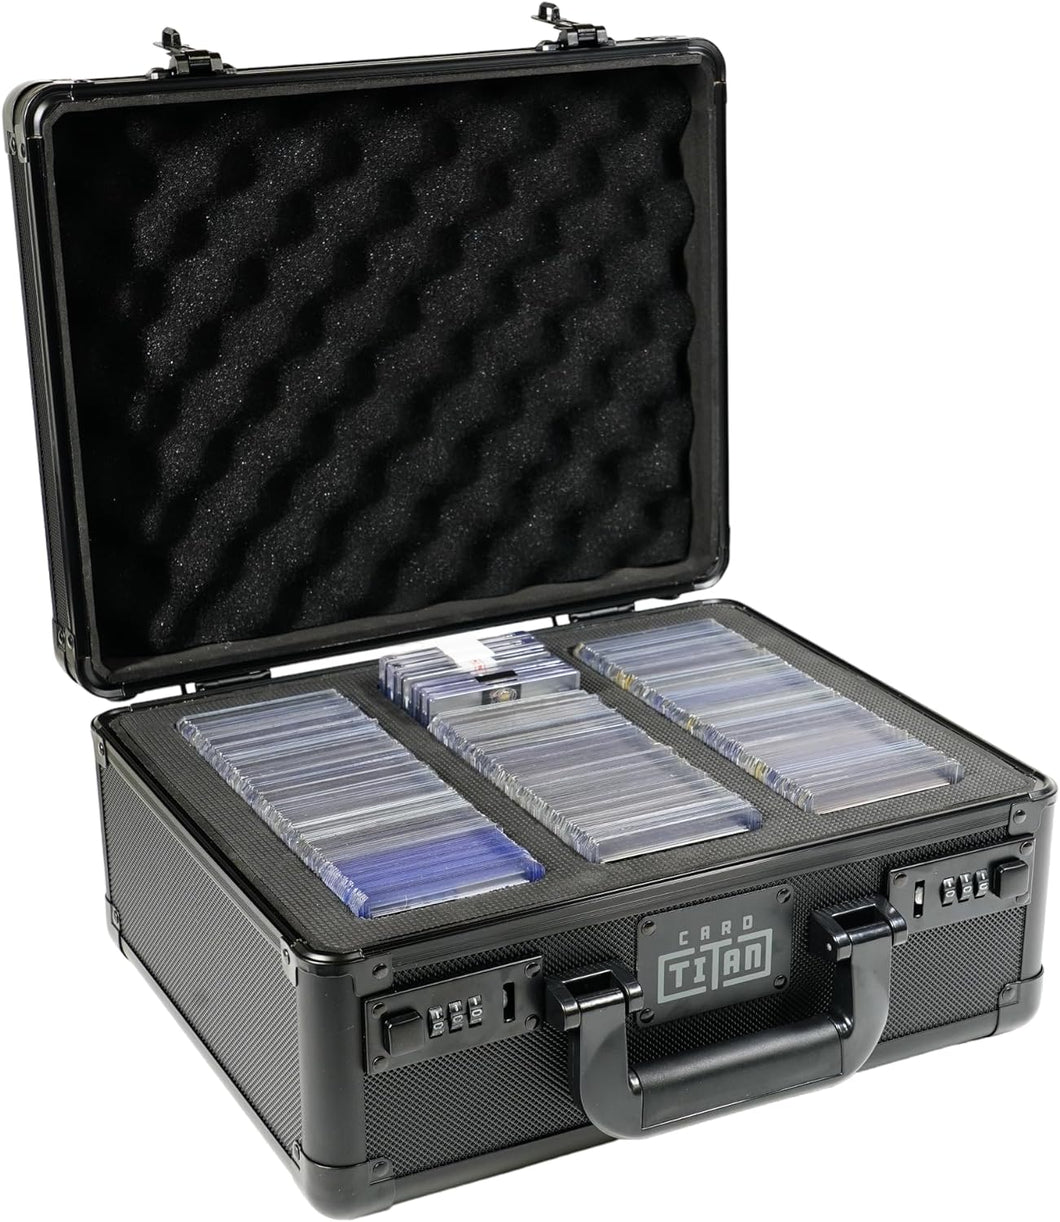 Card Safe 3 Row - Lockable Premium Trading Card Storage Case - Holds up to 345 Standard 35pt Top loaders - Sports Card Case with Laser Cut Foam Interior